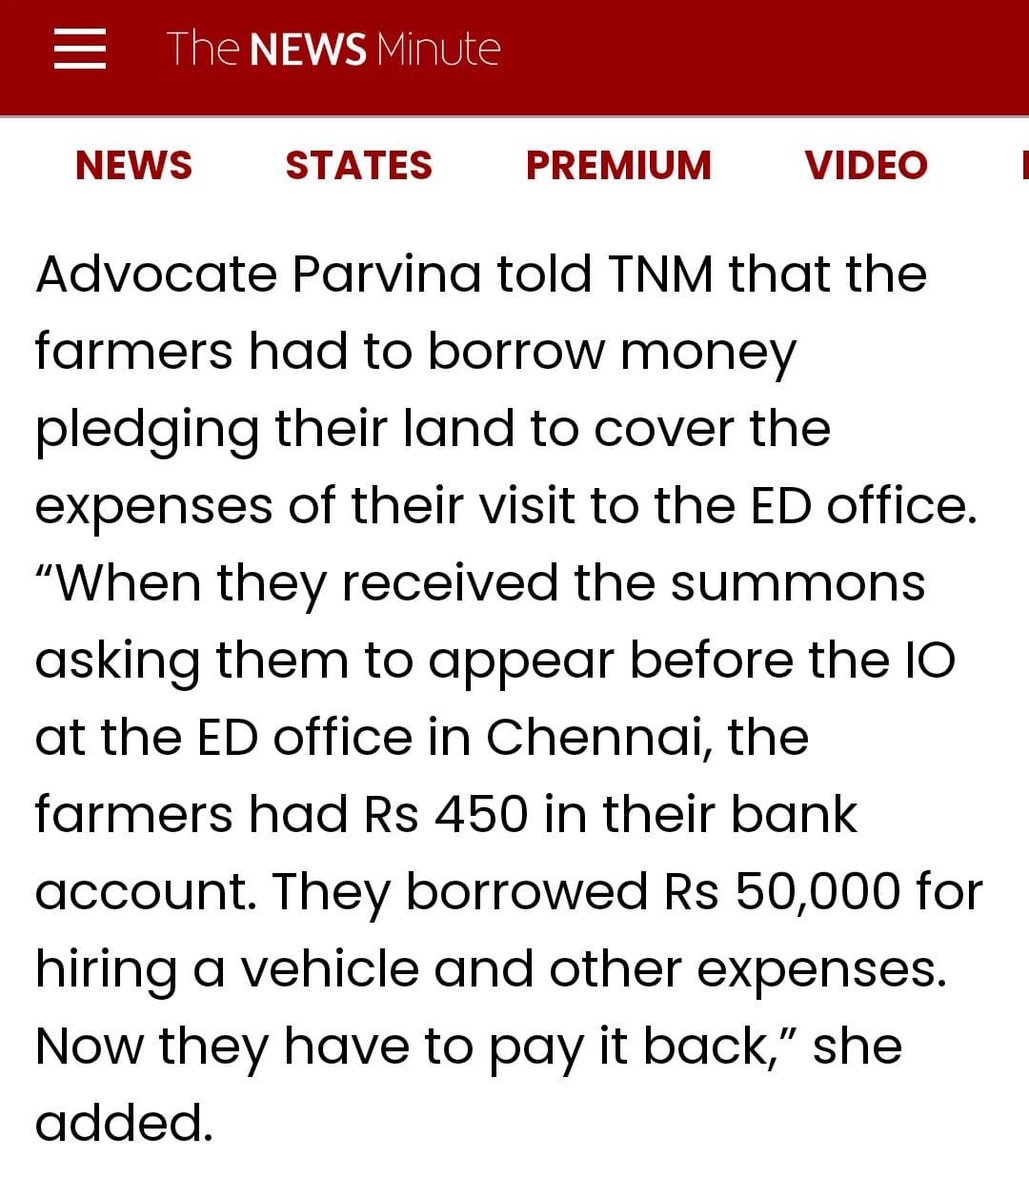 The Dalit farmers had Rs 450 in their bank account and borrowed 50 k to appear before ED. Oh and these farmers were fighting a case against a TN BJPRSS leader!!